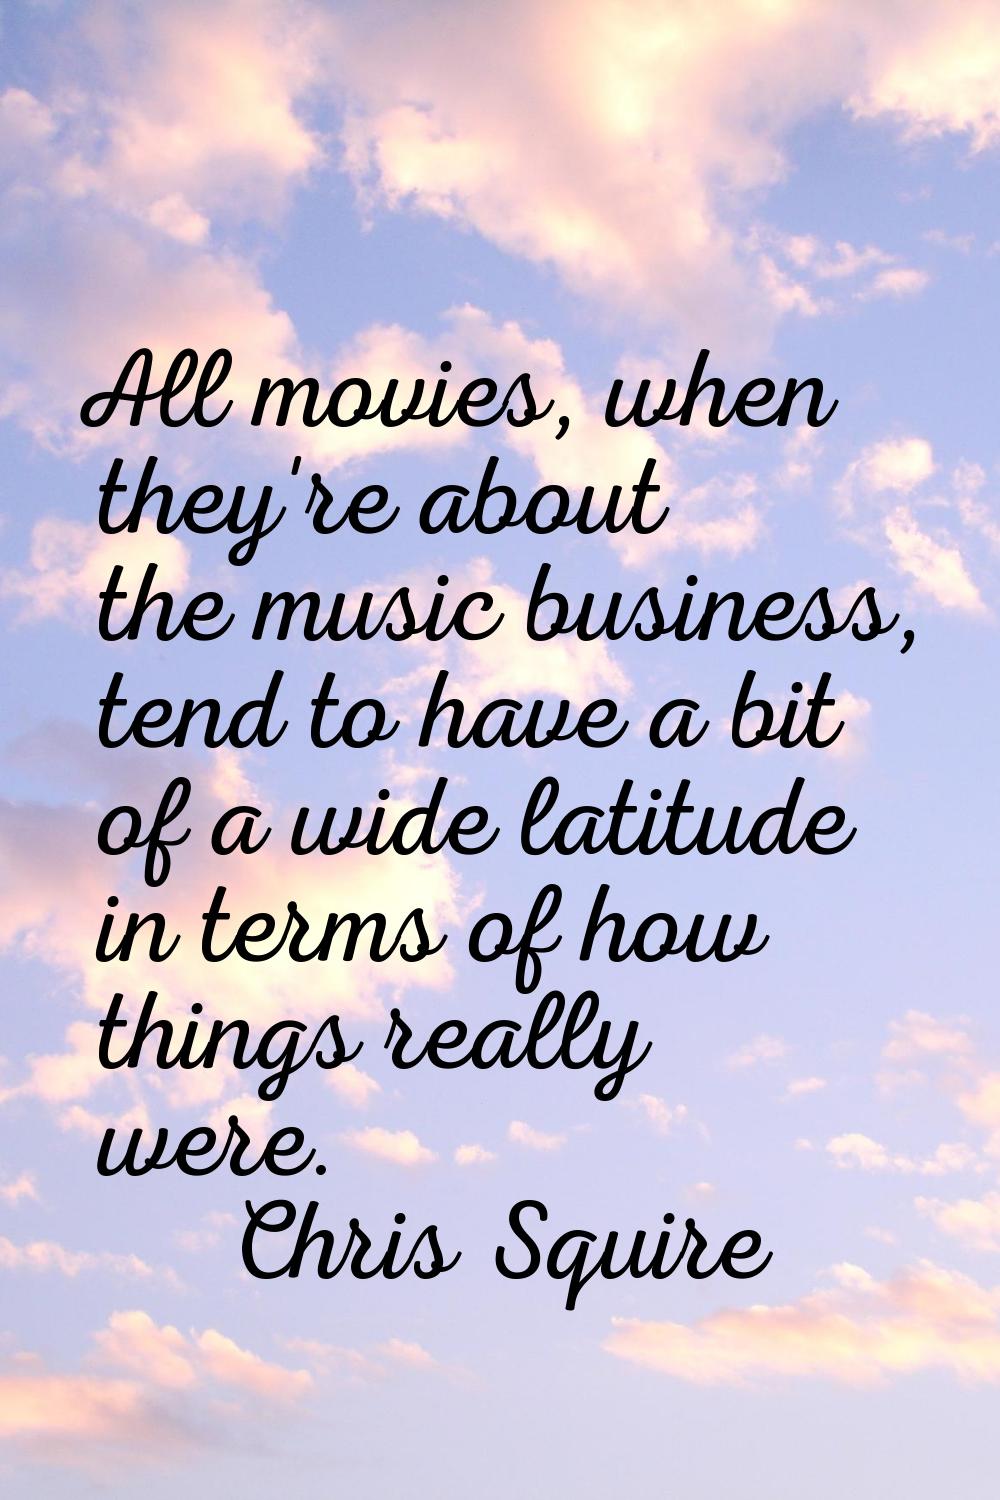 All movies, when they're about the music business, tend to have a bit of a wide latitude in terms o